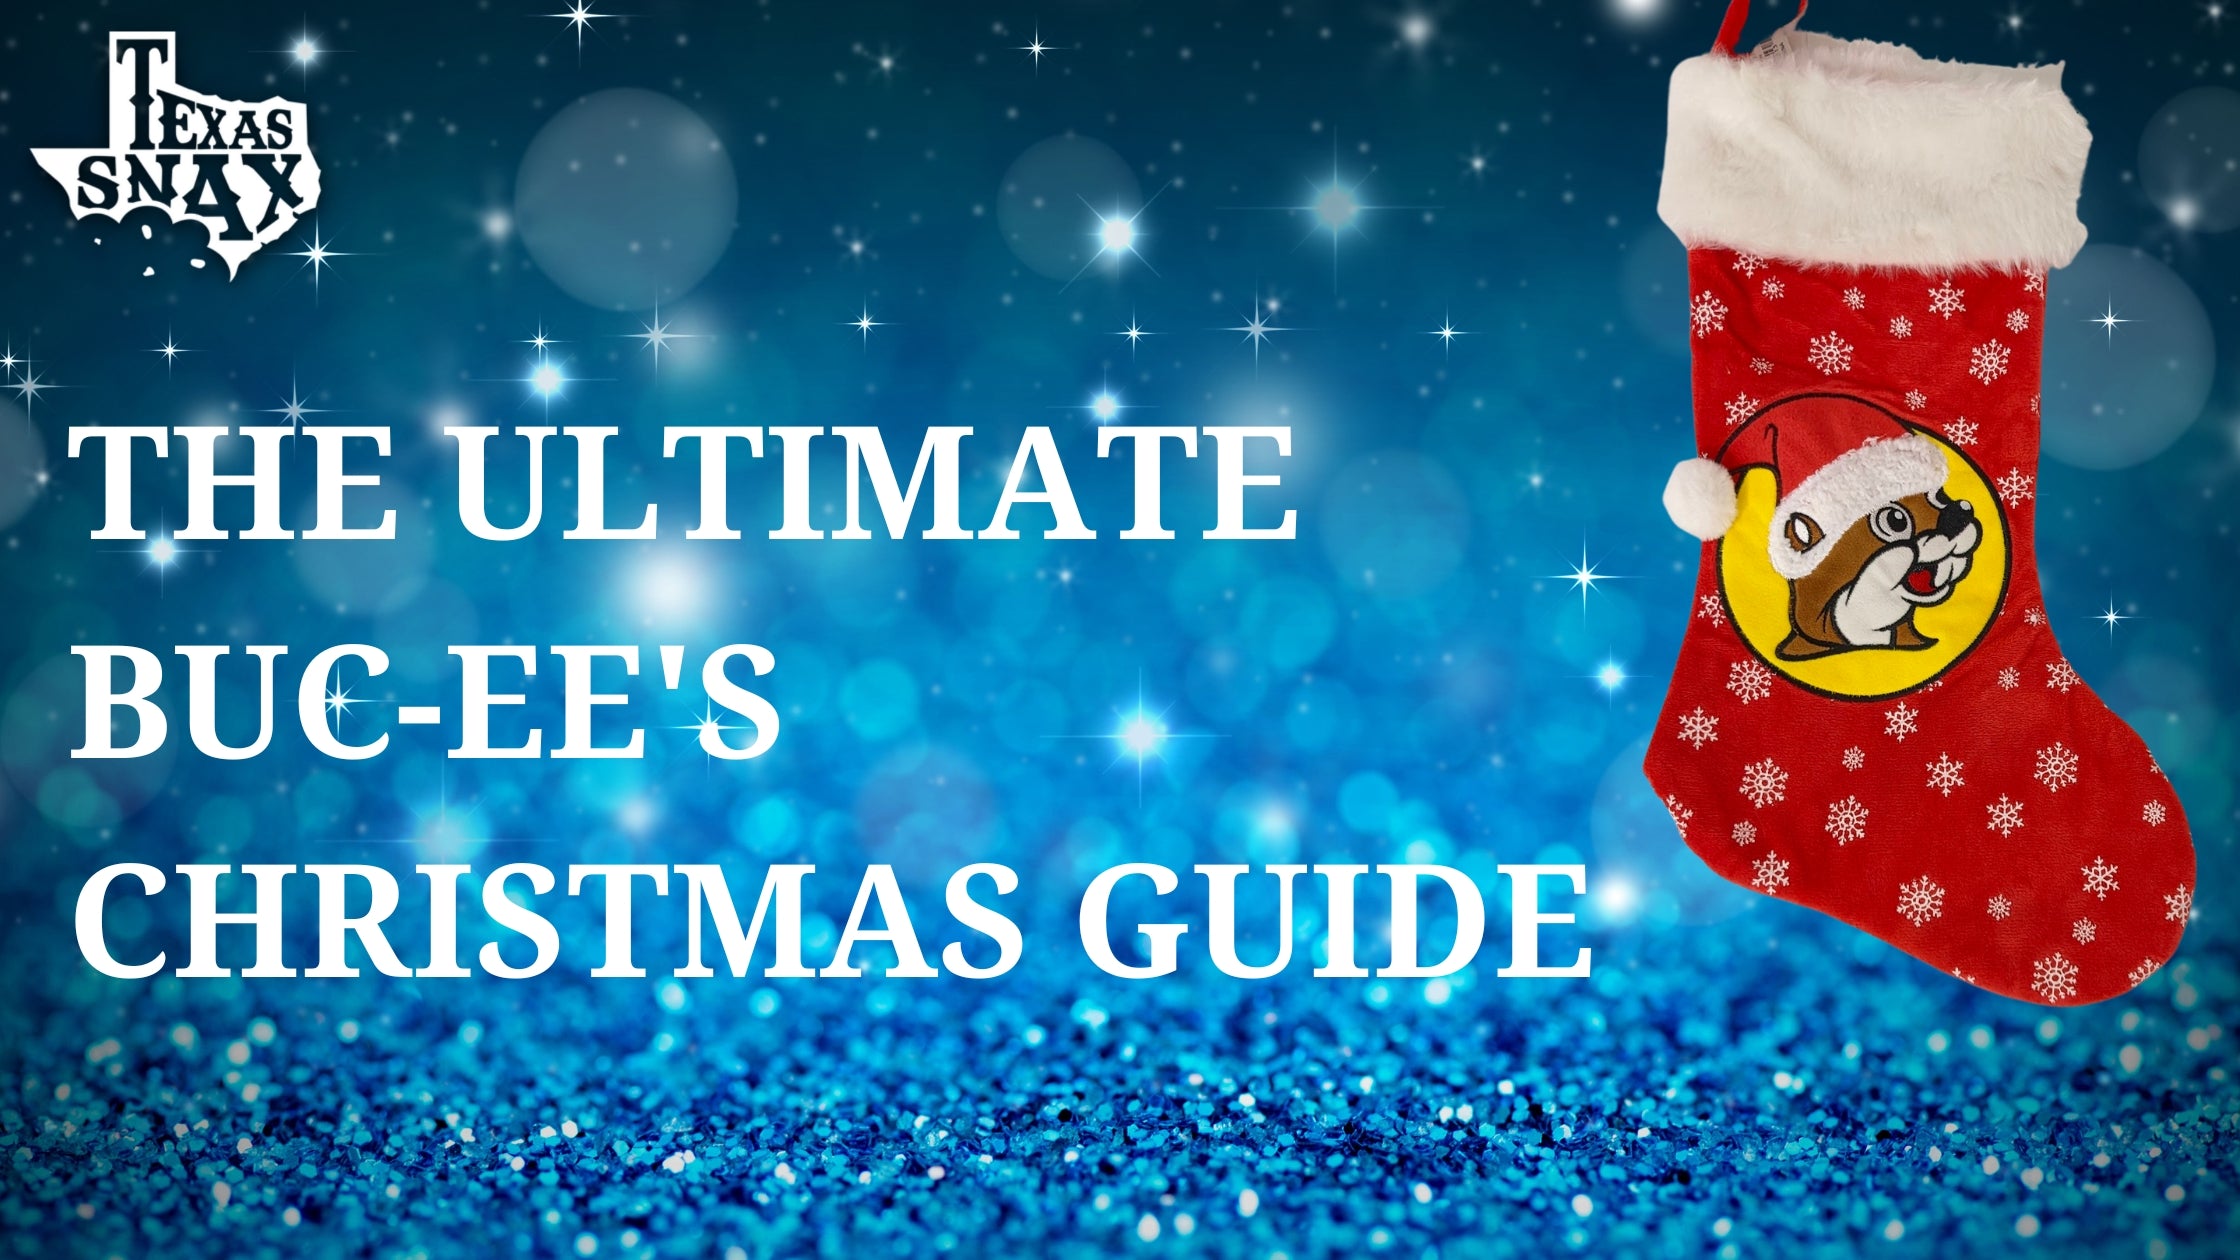 The Ultimate Buc-ee's Christmas Guide – Texas Snax